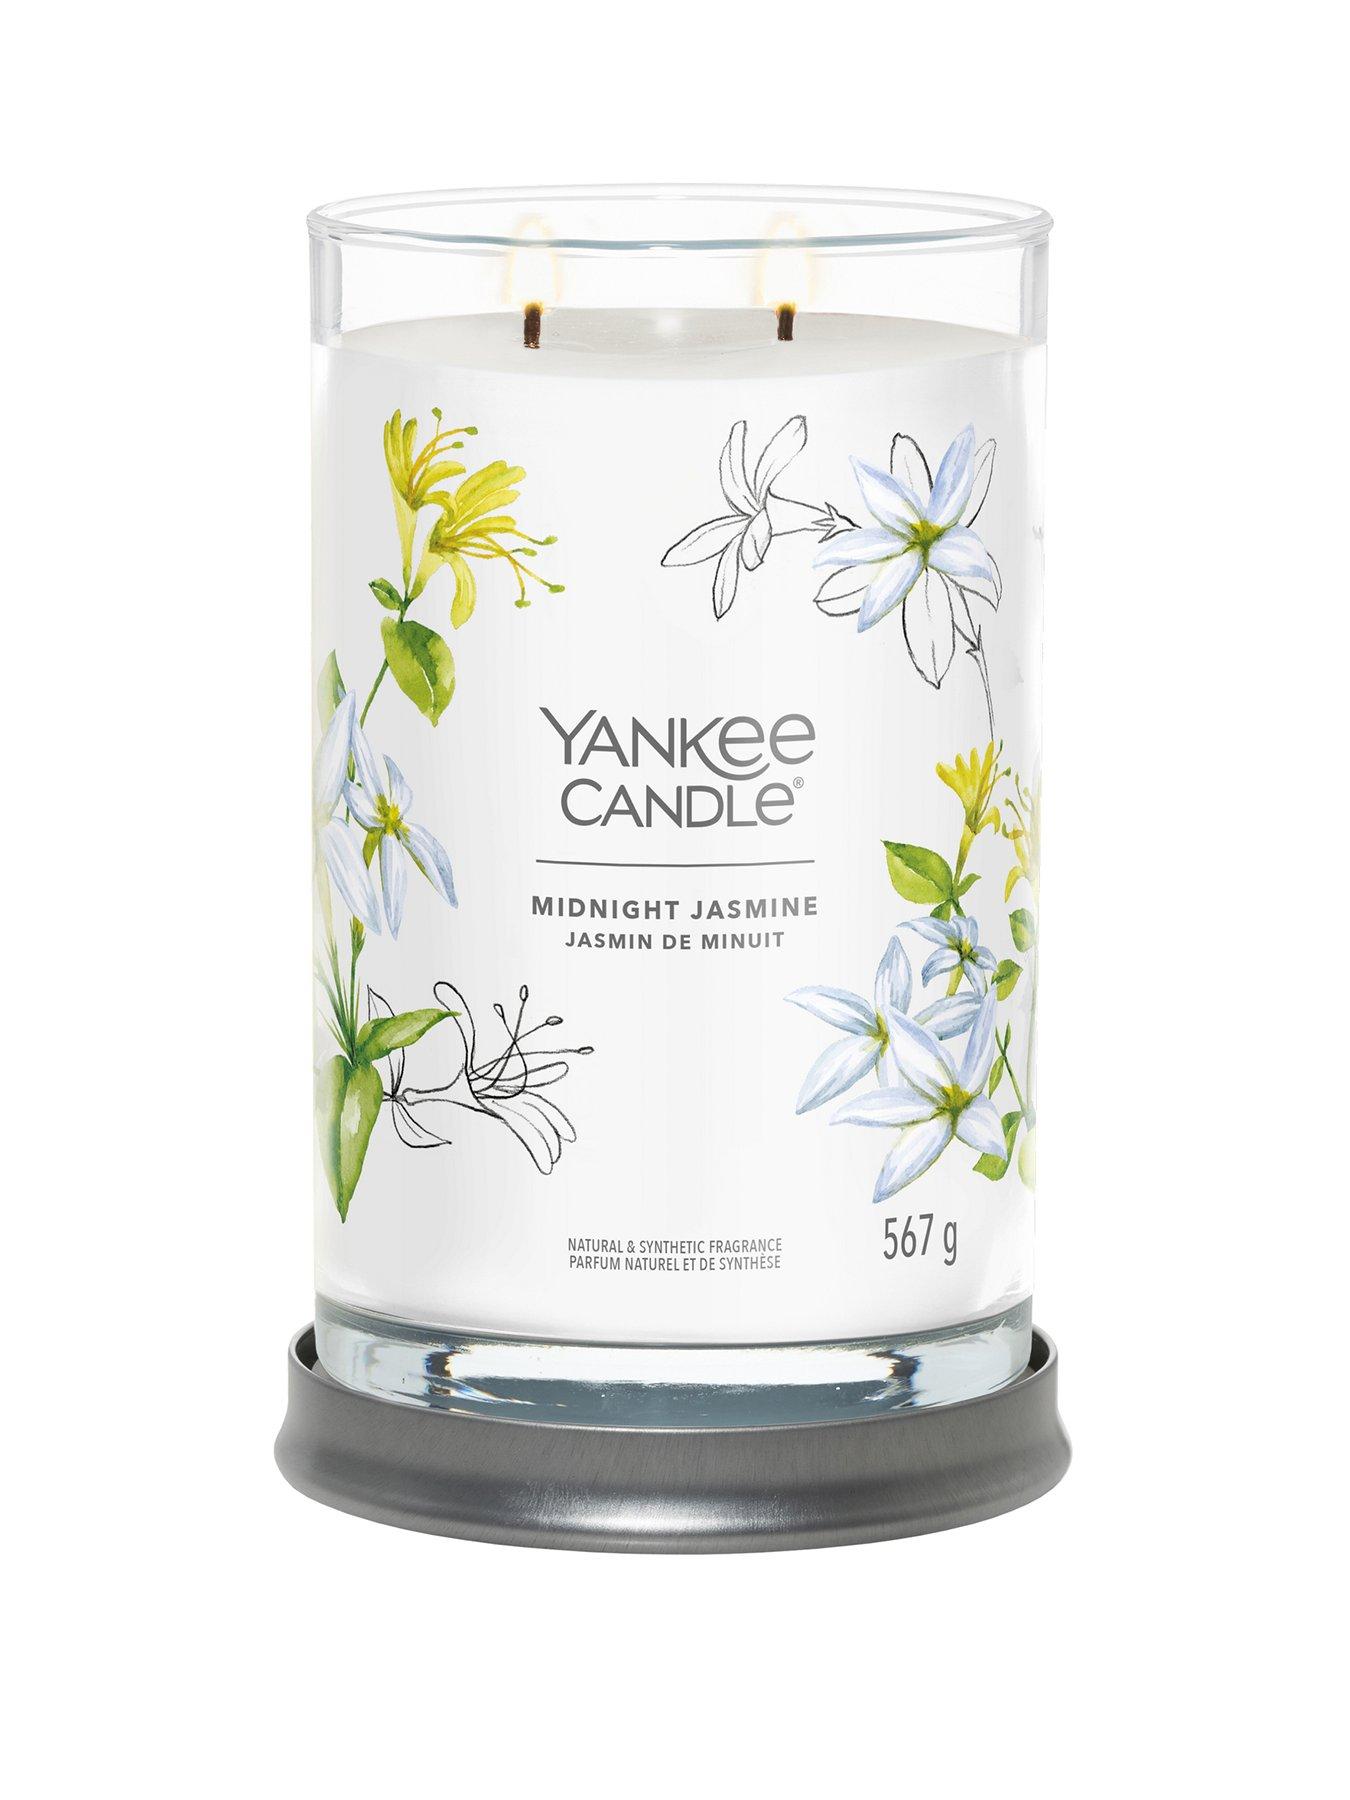 Yankee Candle Shoppers Complain After Delayed, Broken Orders